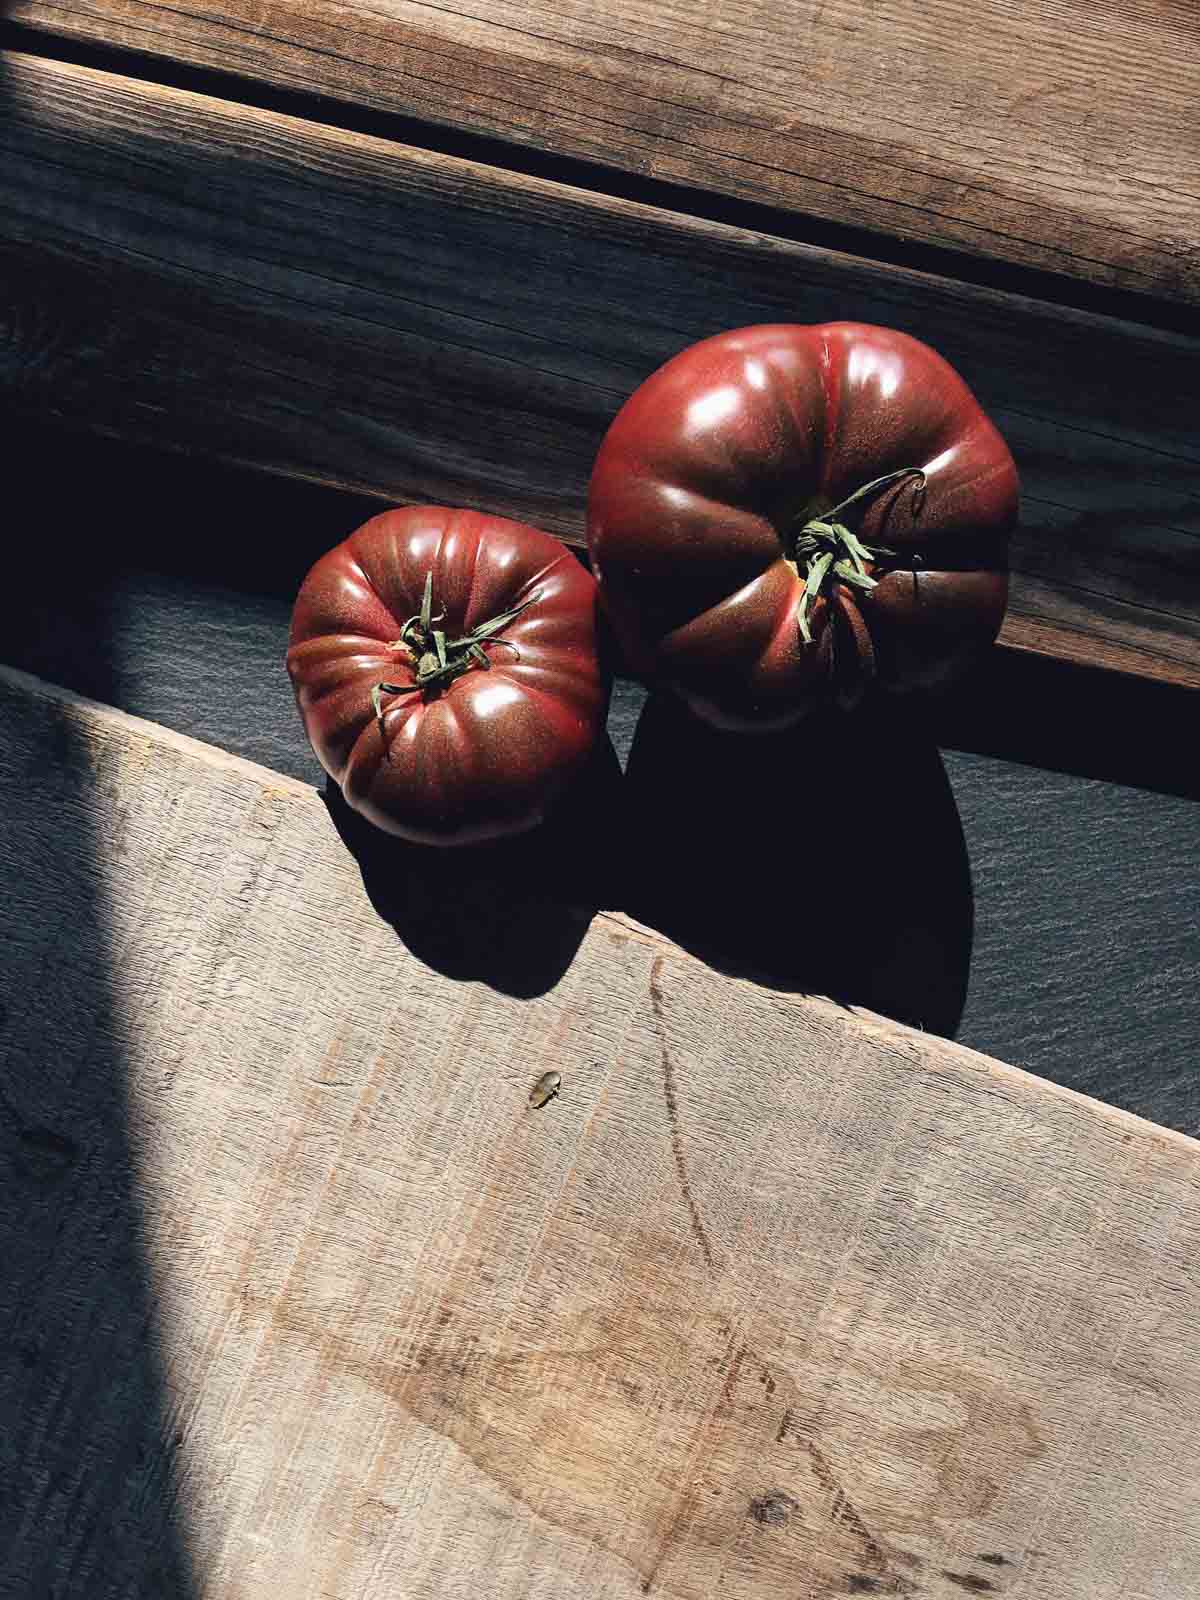 Directly above shot of two fresh Black tomatoes on wooden table